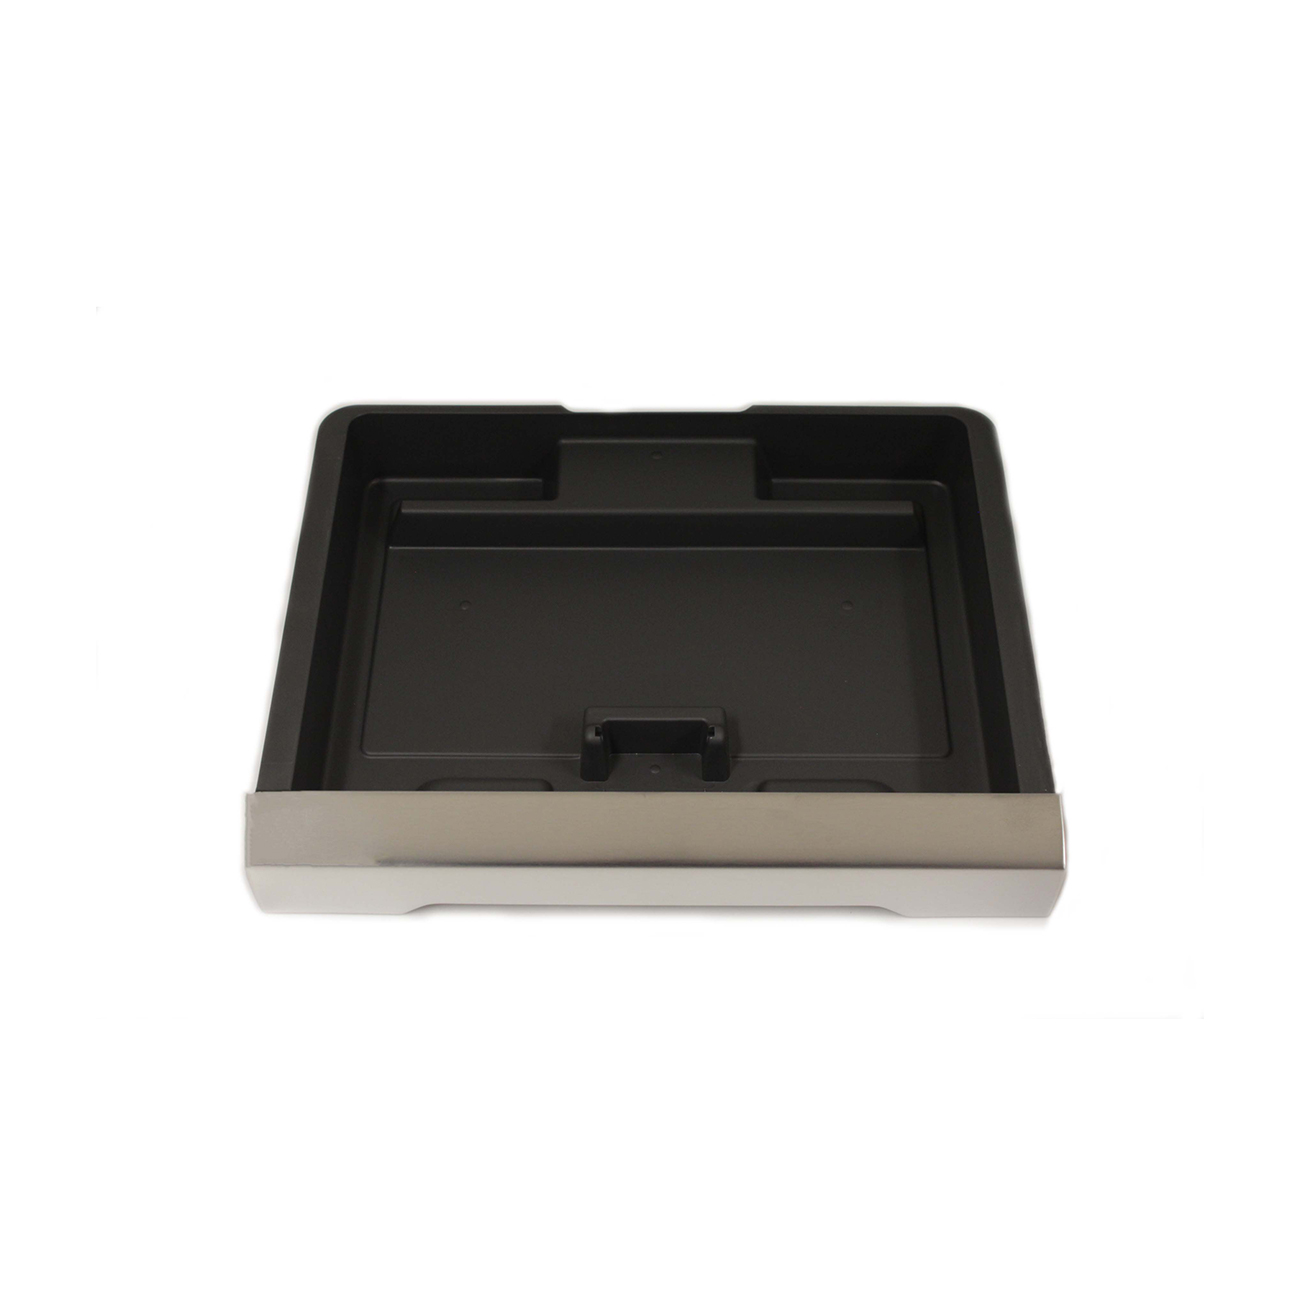 Tray Drip (Brushed Stainless Steel)